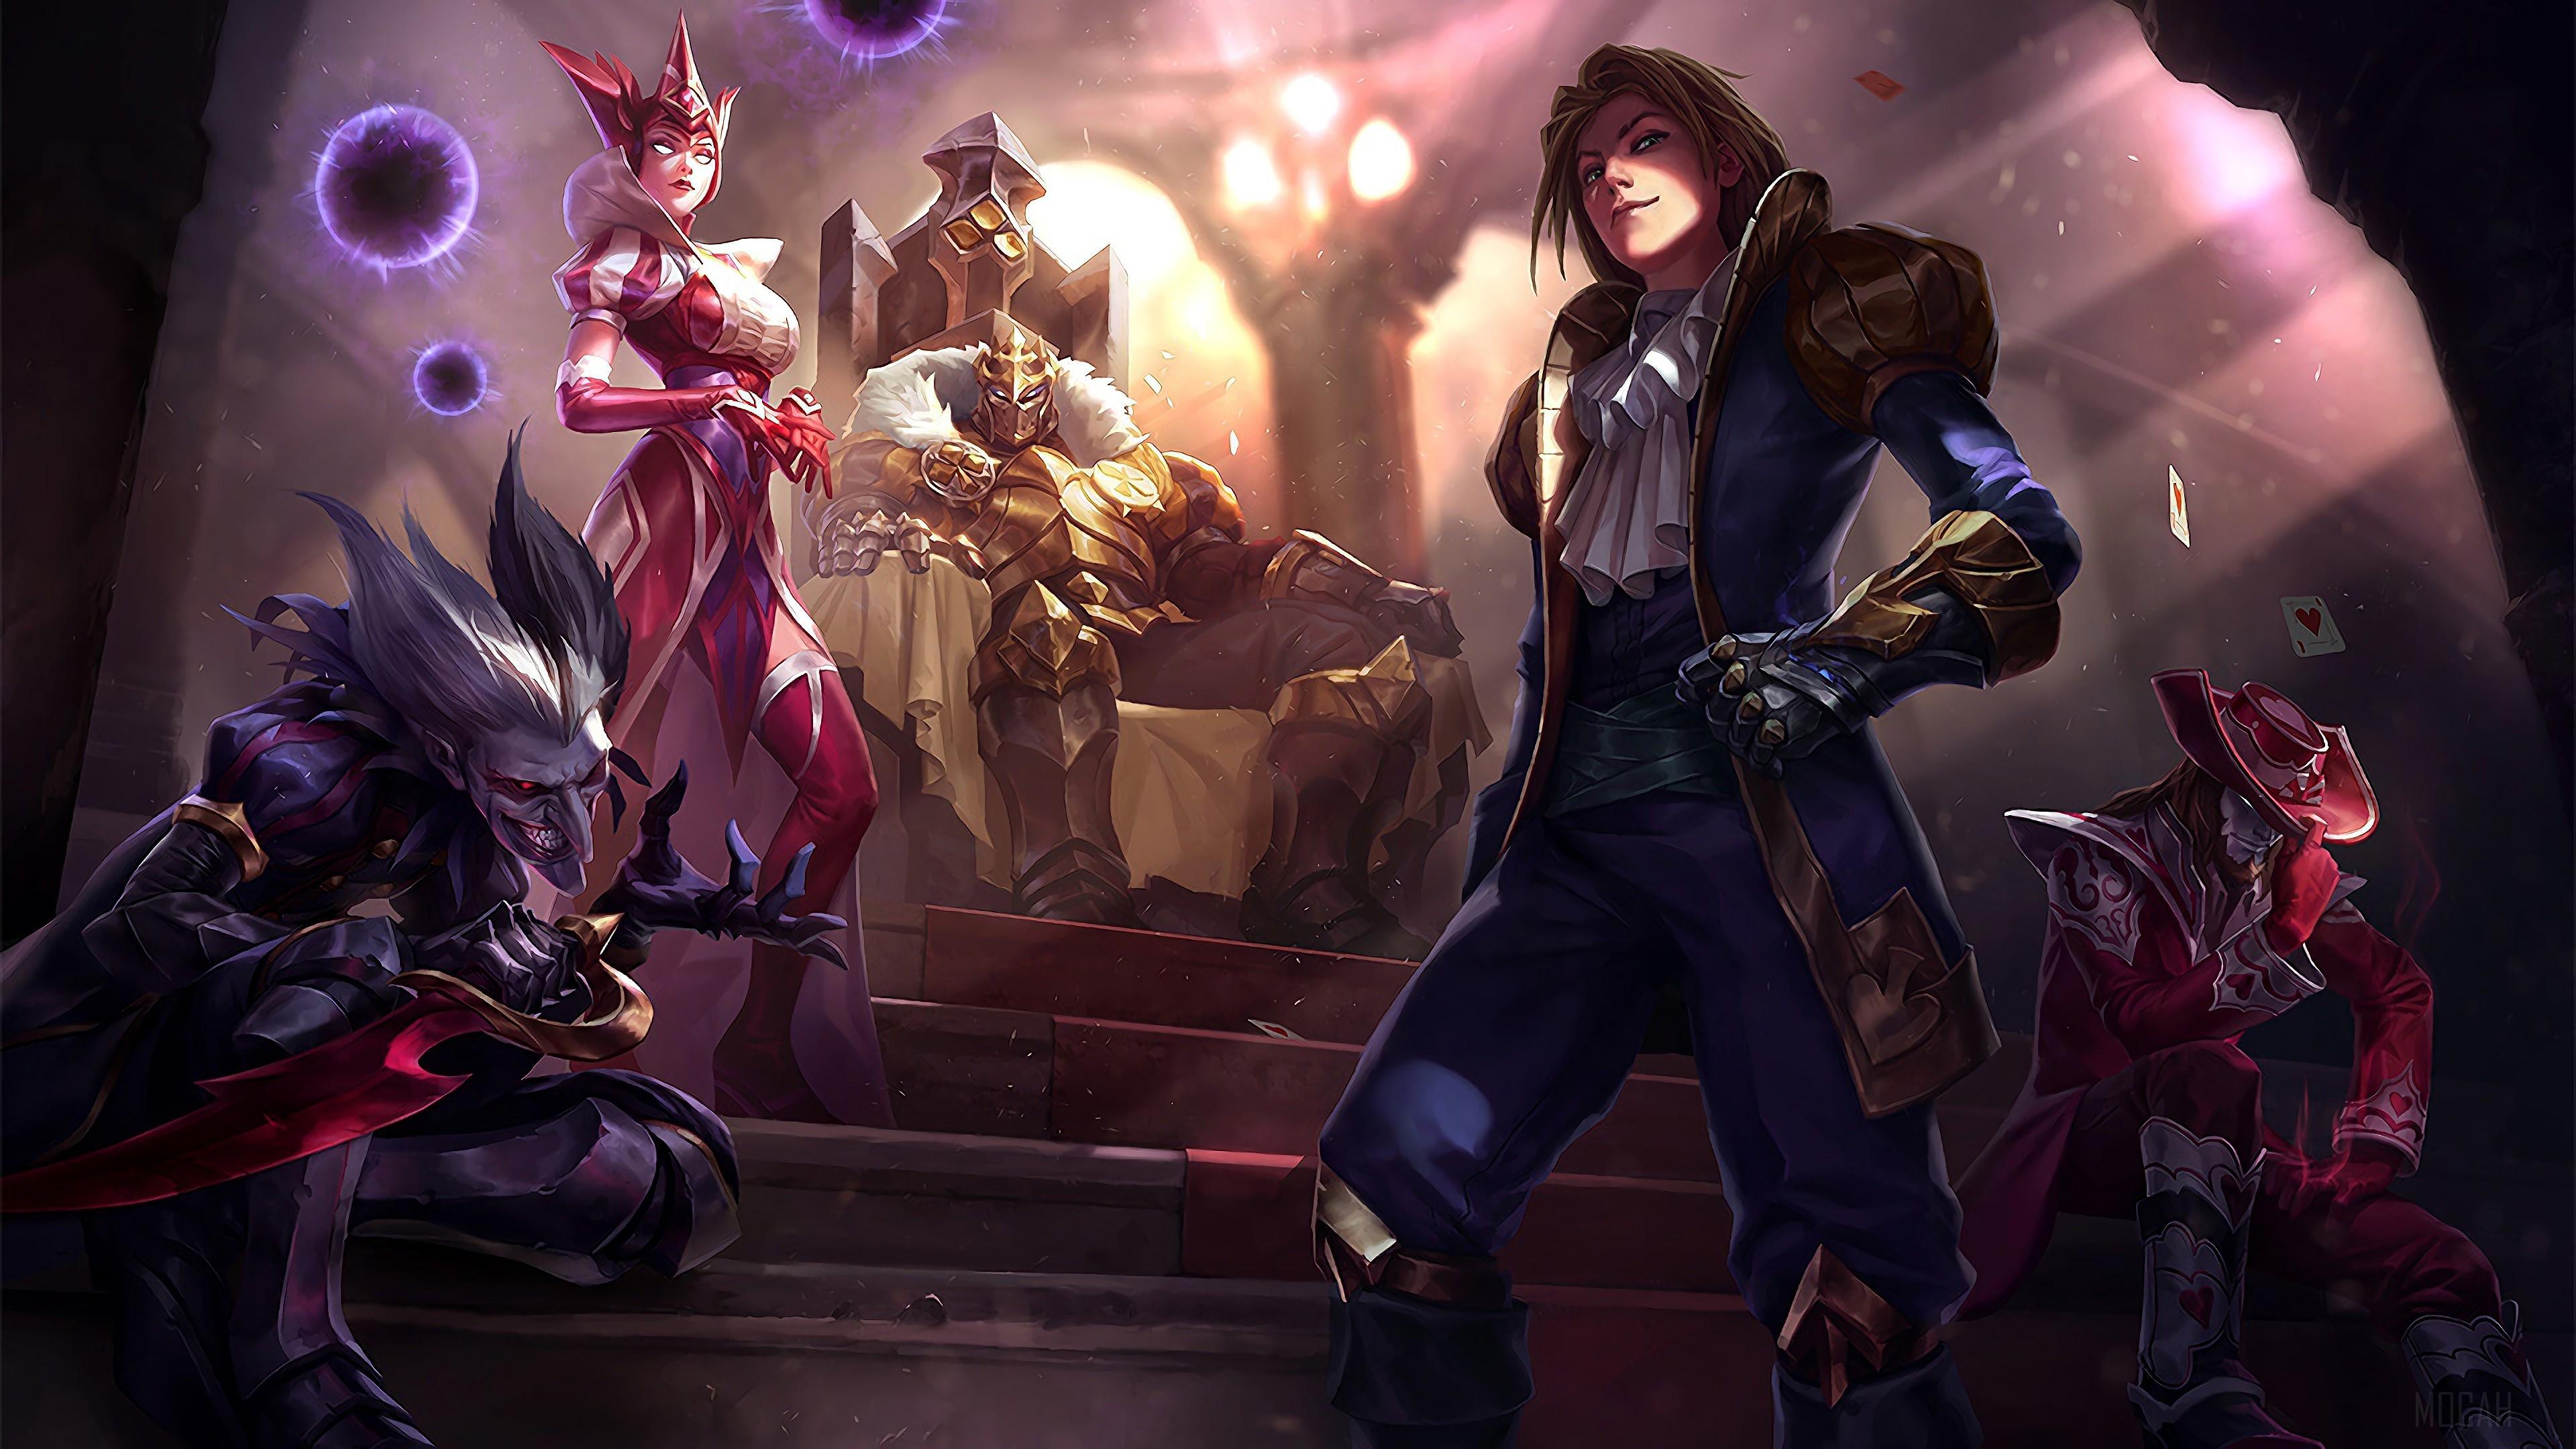 HD wallpaper, Ace Of Spades Ezreal King Of Clubs Mordekaiser Queen Of Diamonds Syndra Wild Card Shaco Jack Of Hearts Twisted Fate Lol Splash Art League Of Legends Lol 4K